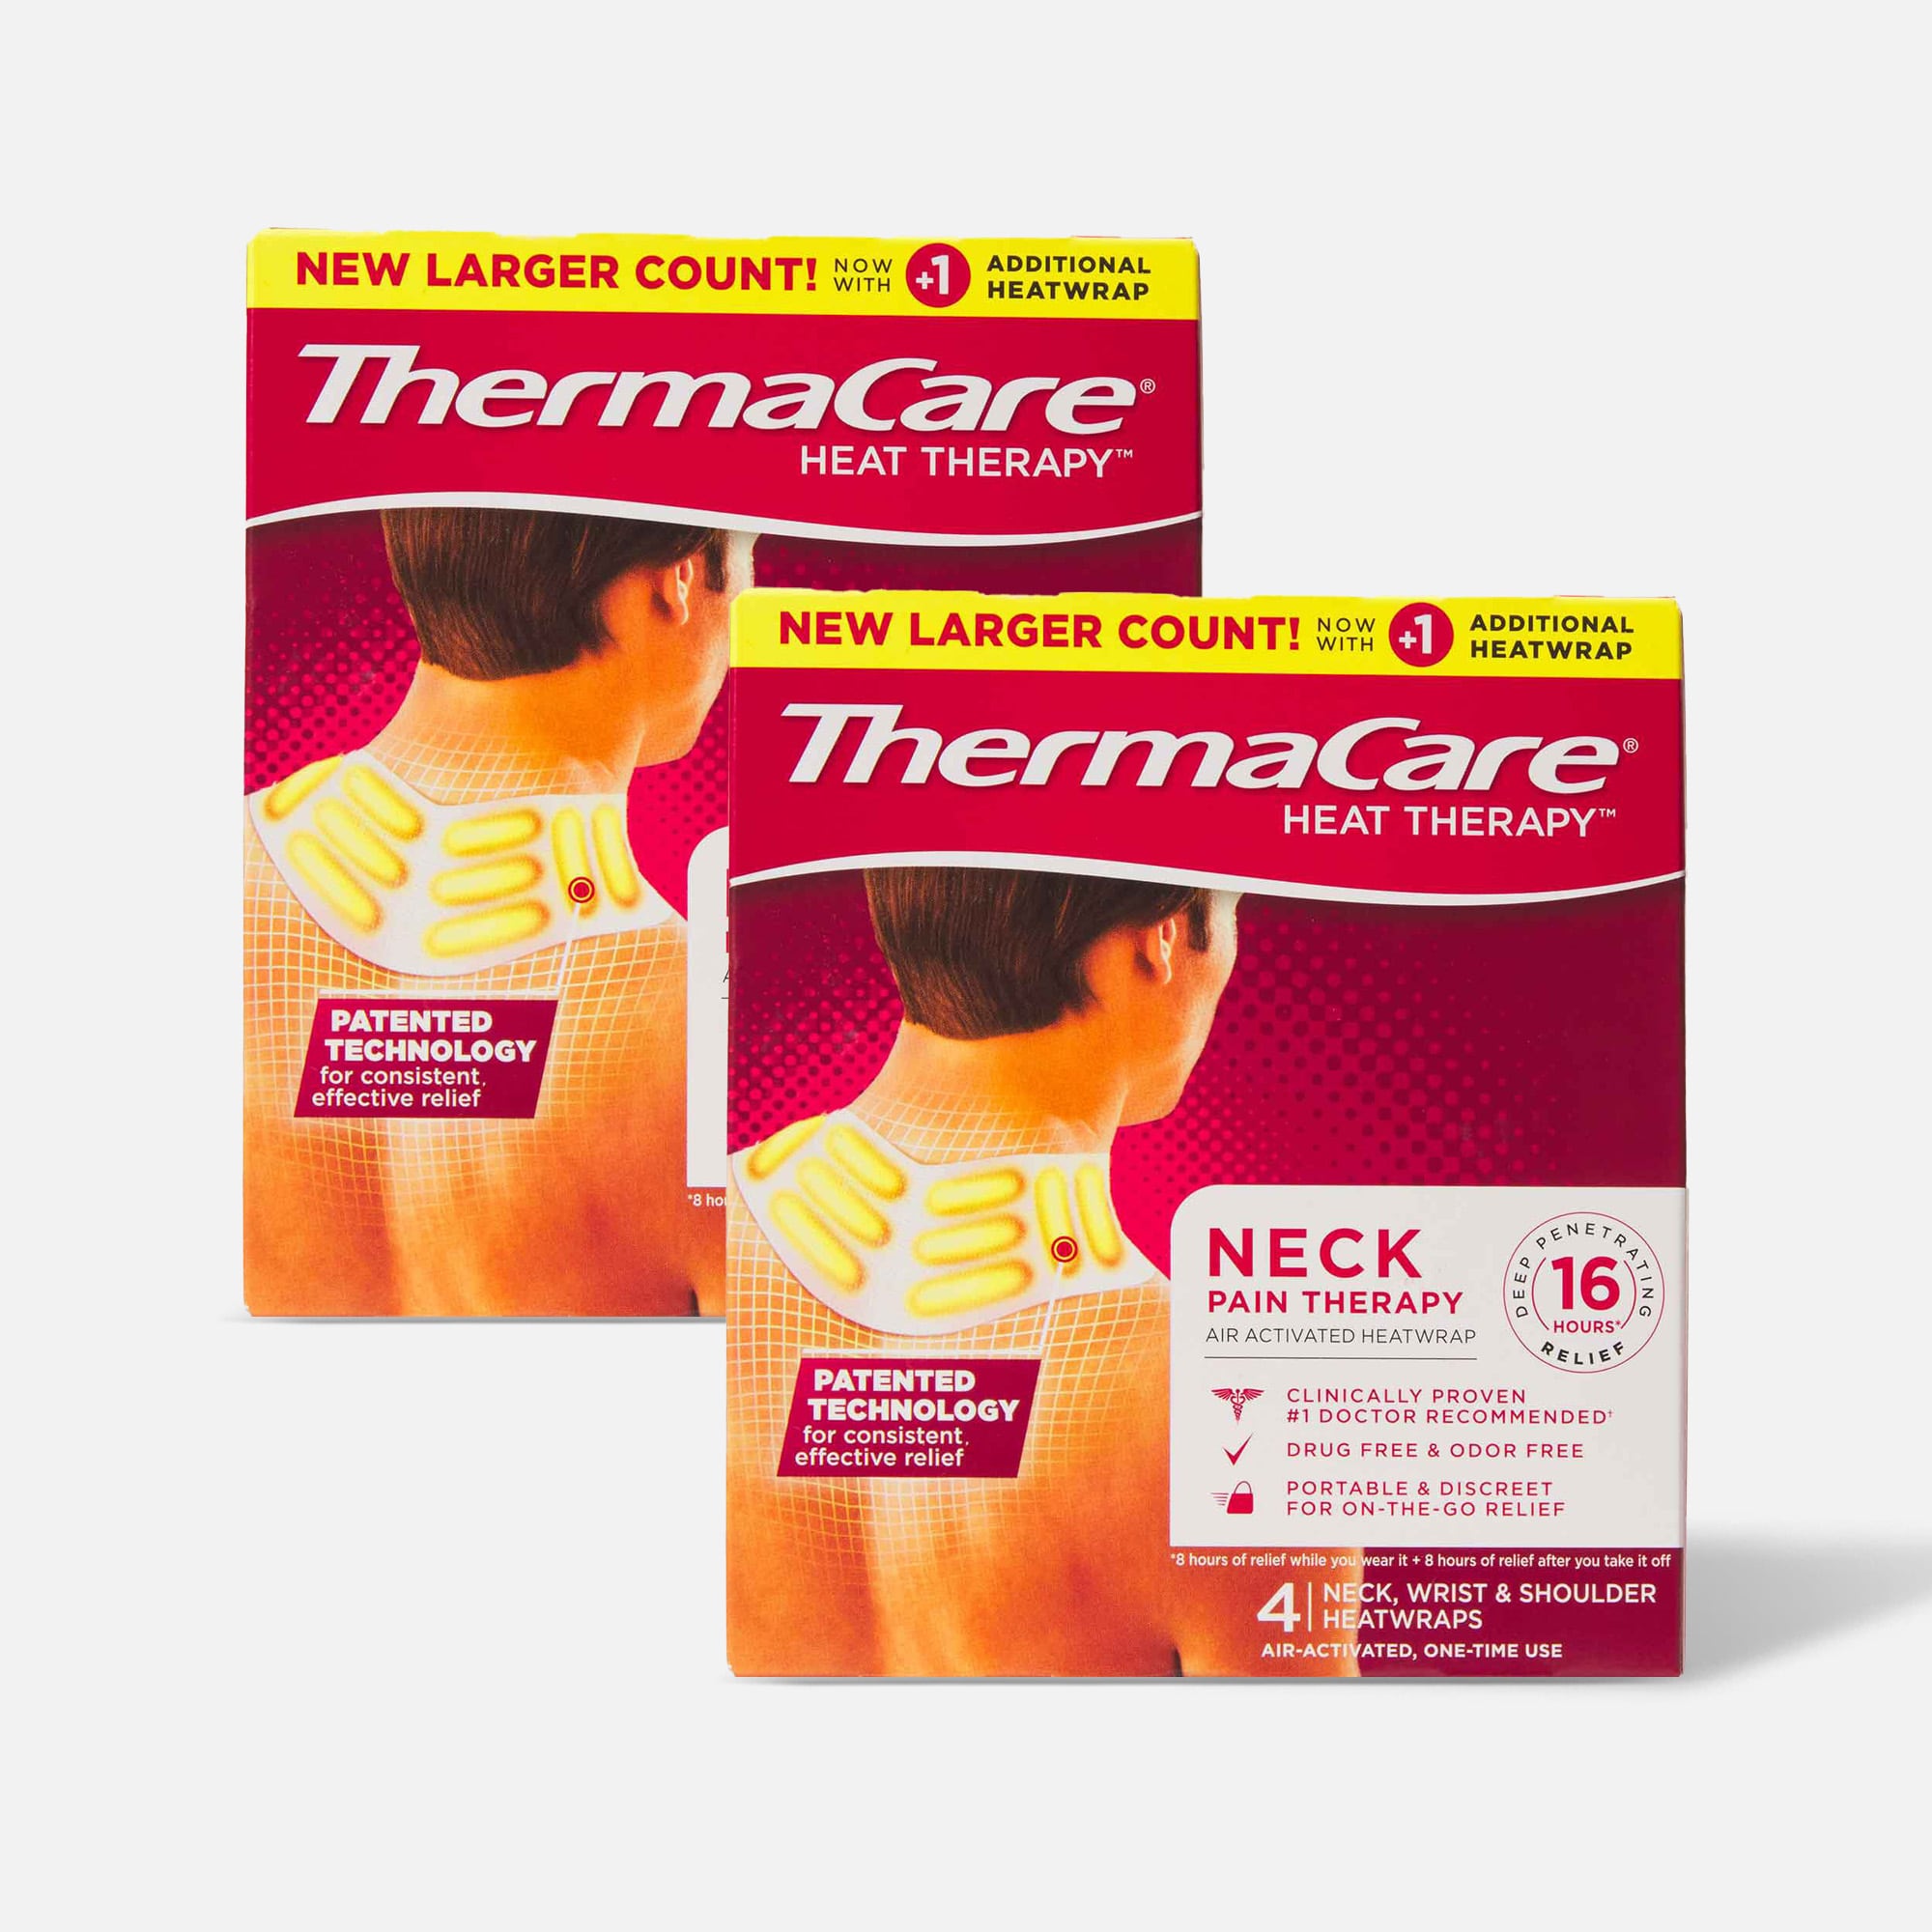 https://fsastore.com/on/demandware.static/-/Sites-hec-master/default/dw24c68576/images/large/2P-ThermaCare-Neck-Pain-Therapy-4ct-_10547b.jpg